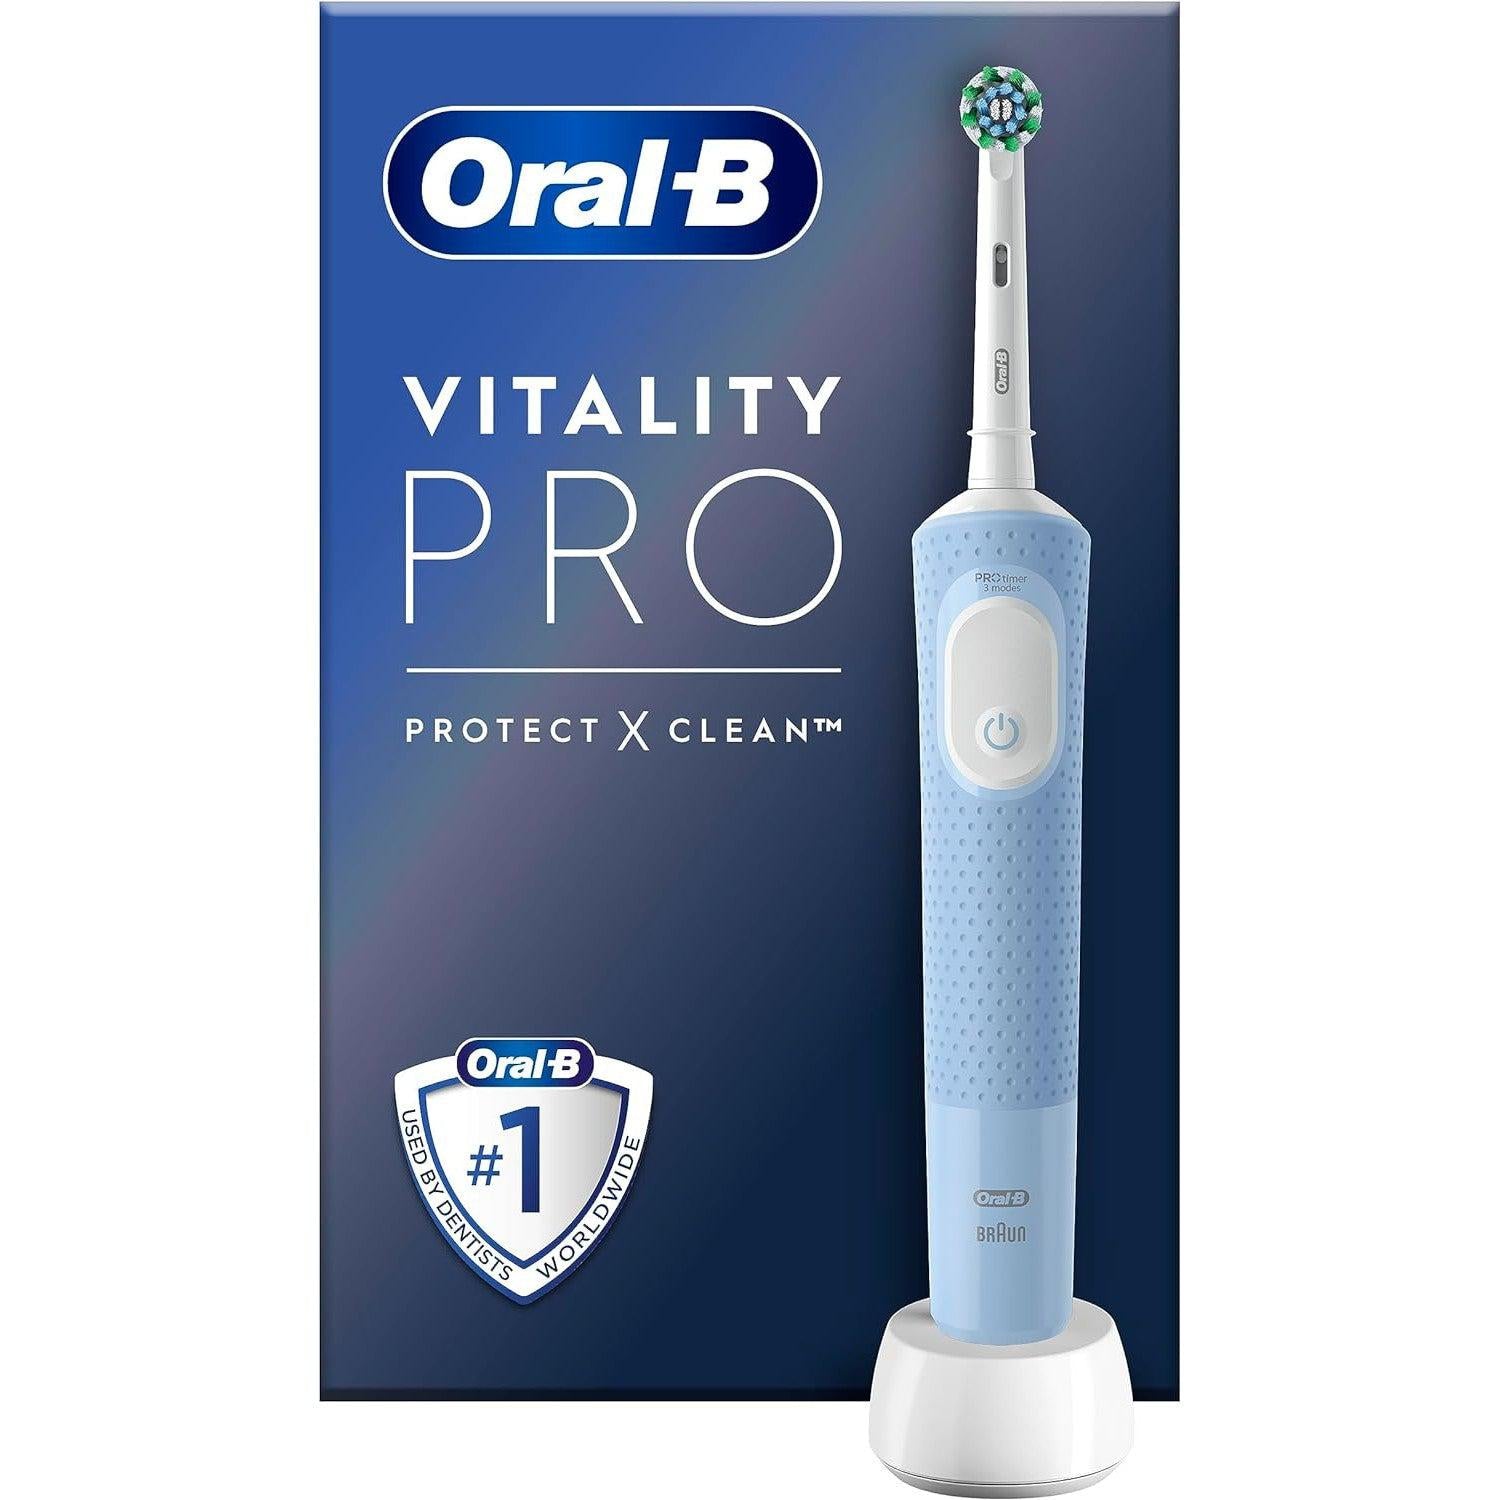 Oral-B Vitality Pro Electric Toothbrush with 1 x Crossaction Brush Head - Blue